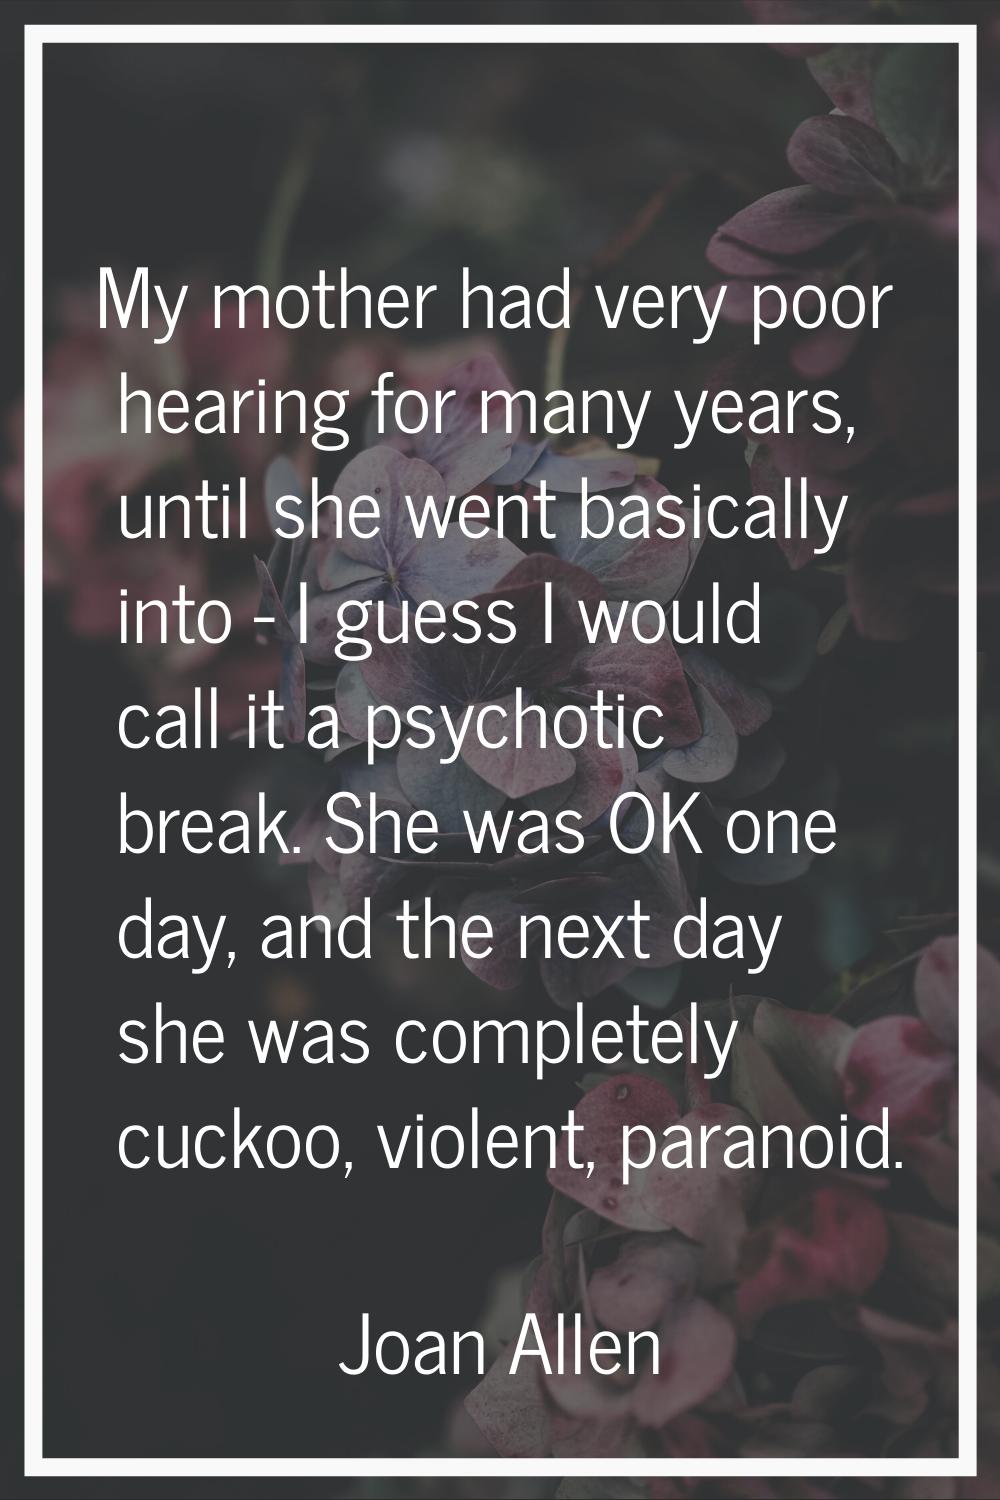 My mother had very poor hearing for many years, until she went basically into - I guess I would cal